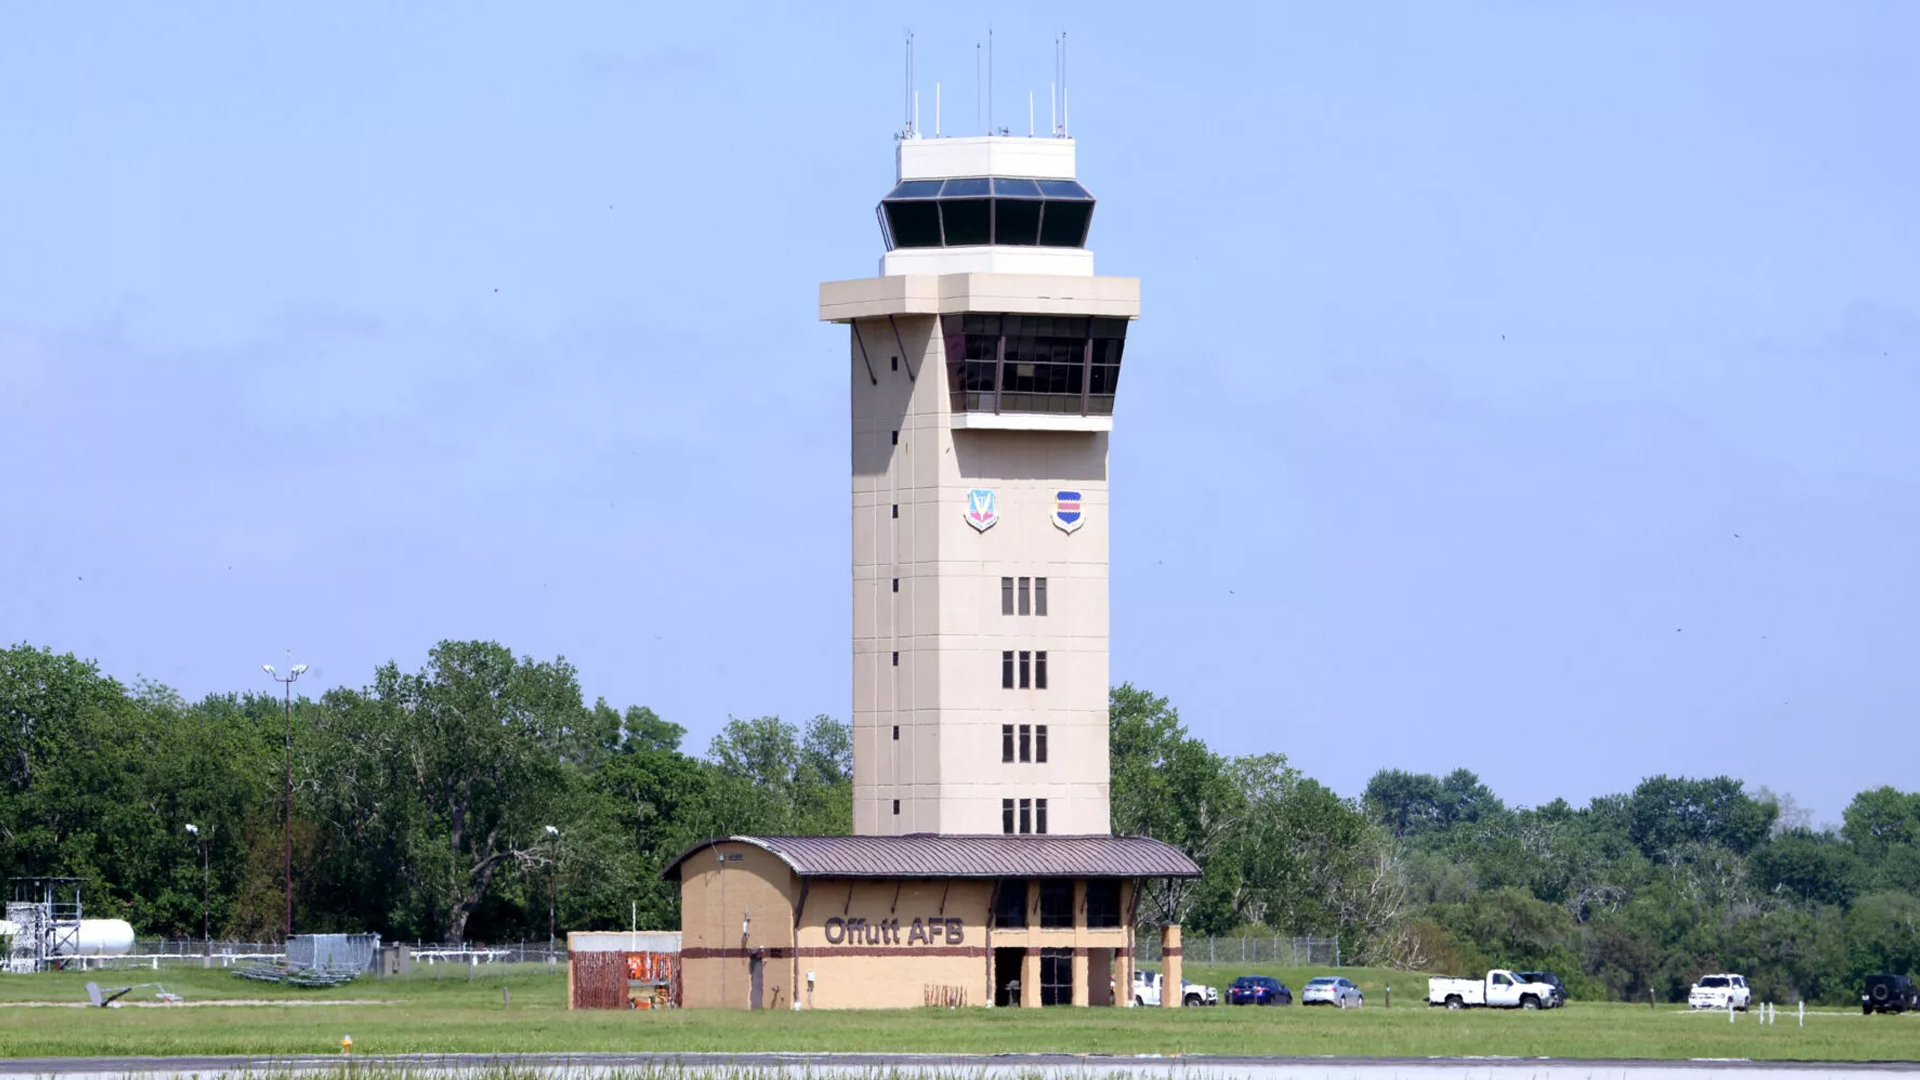 Offutt Air Force Base Implements Lockdown, Doors Must Be Barricaded...